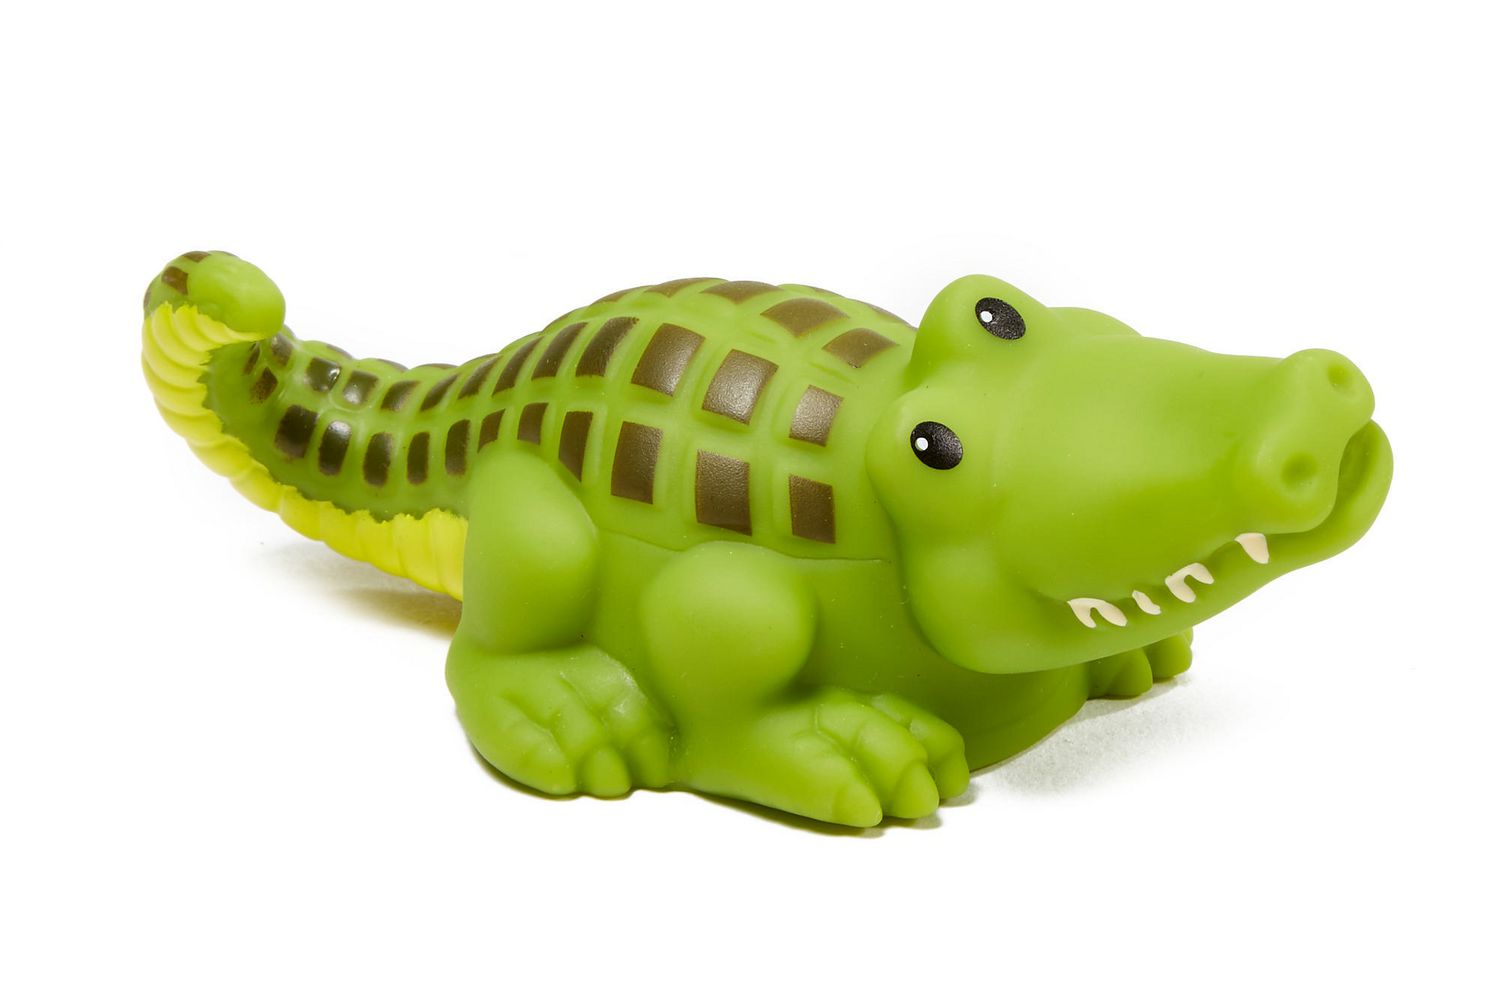 Fisher Little People Zoo Safari Share Care Animal Alligator 2018 Toy for sale online 